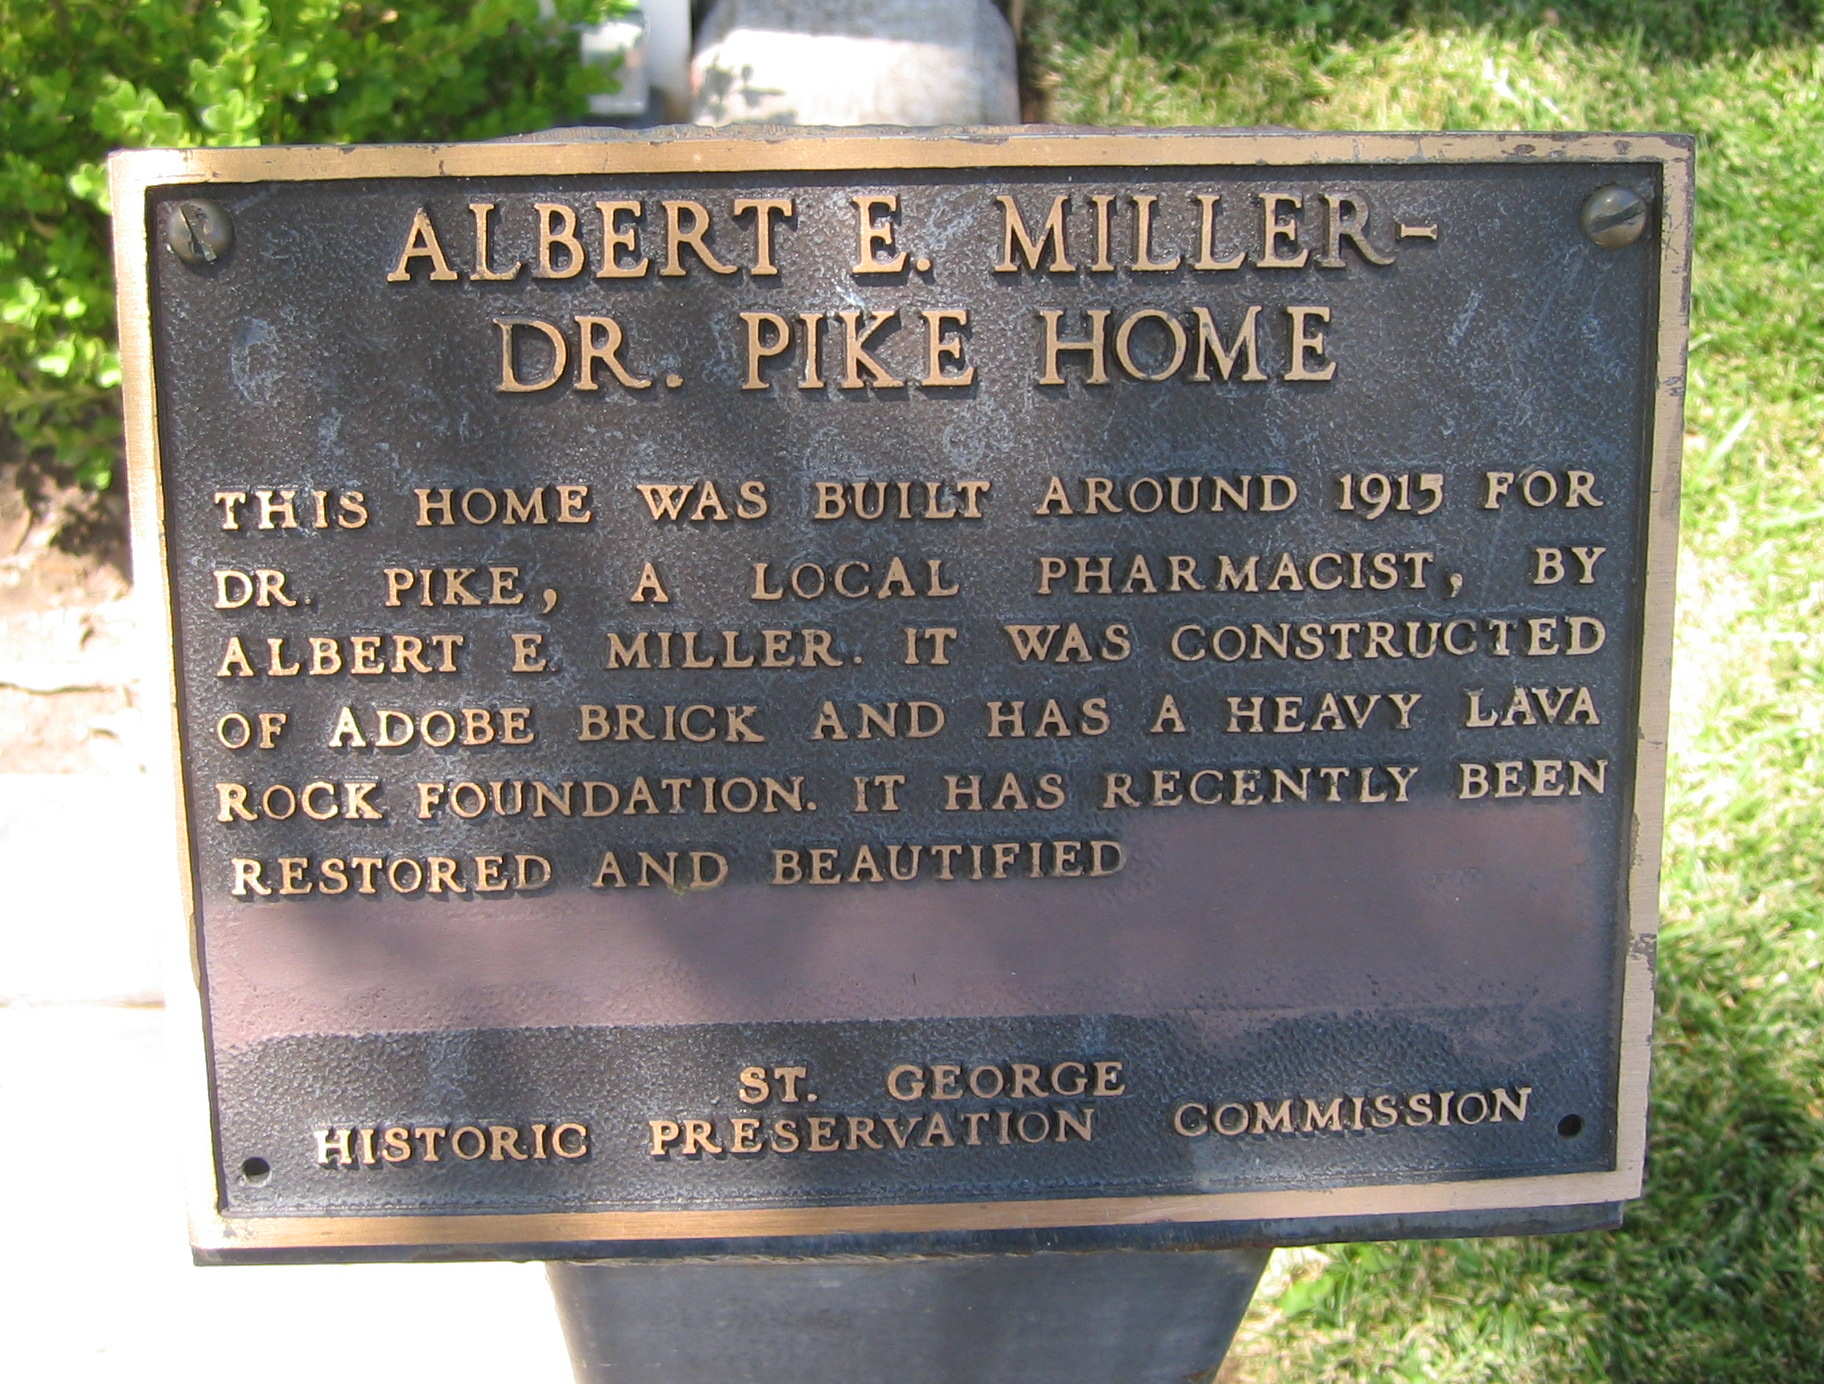 WCHS-00193 Plaque in front of the Miller-Pike home